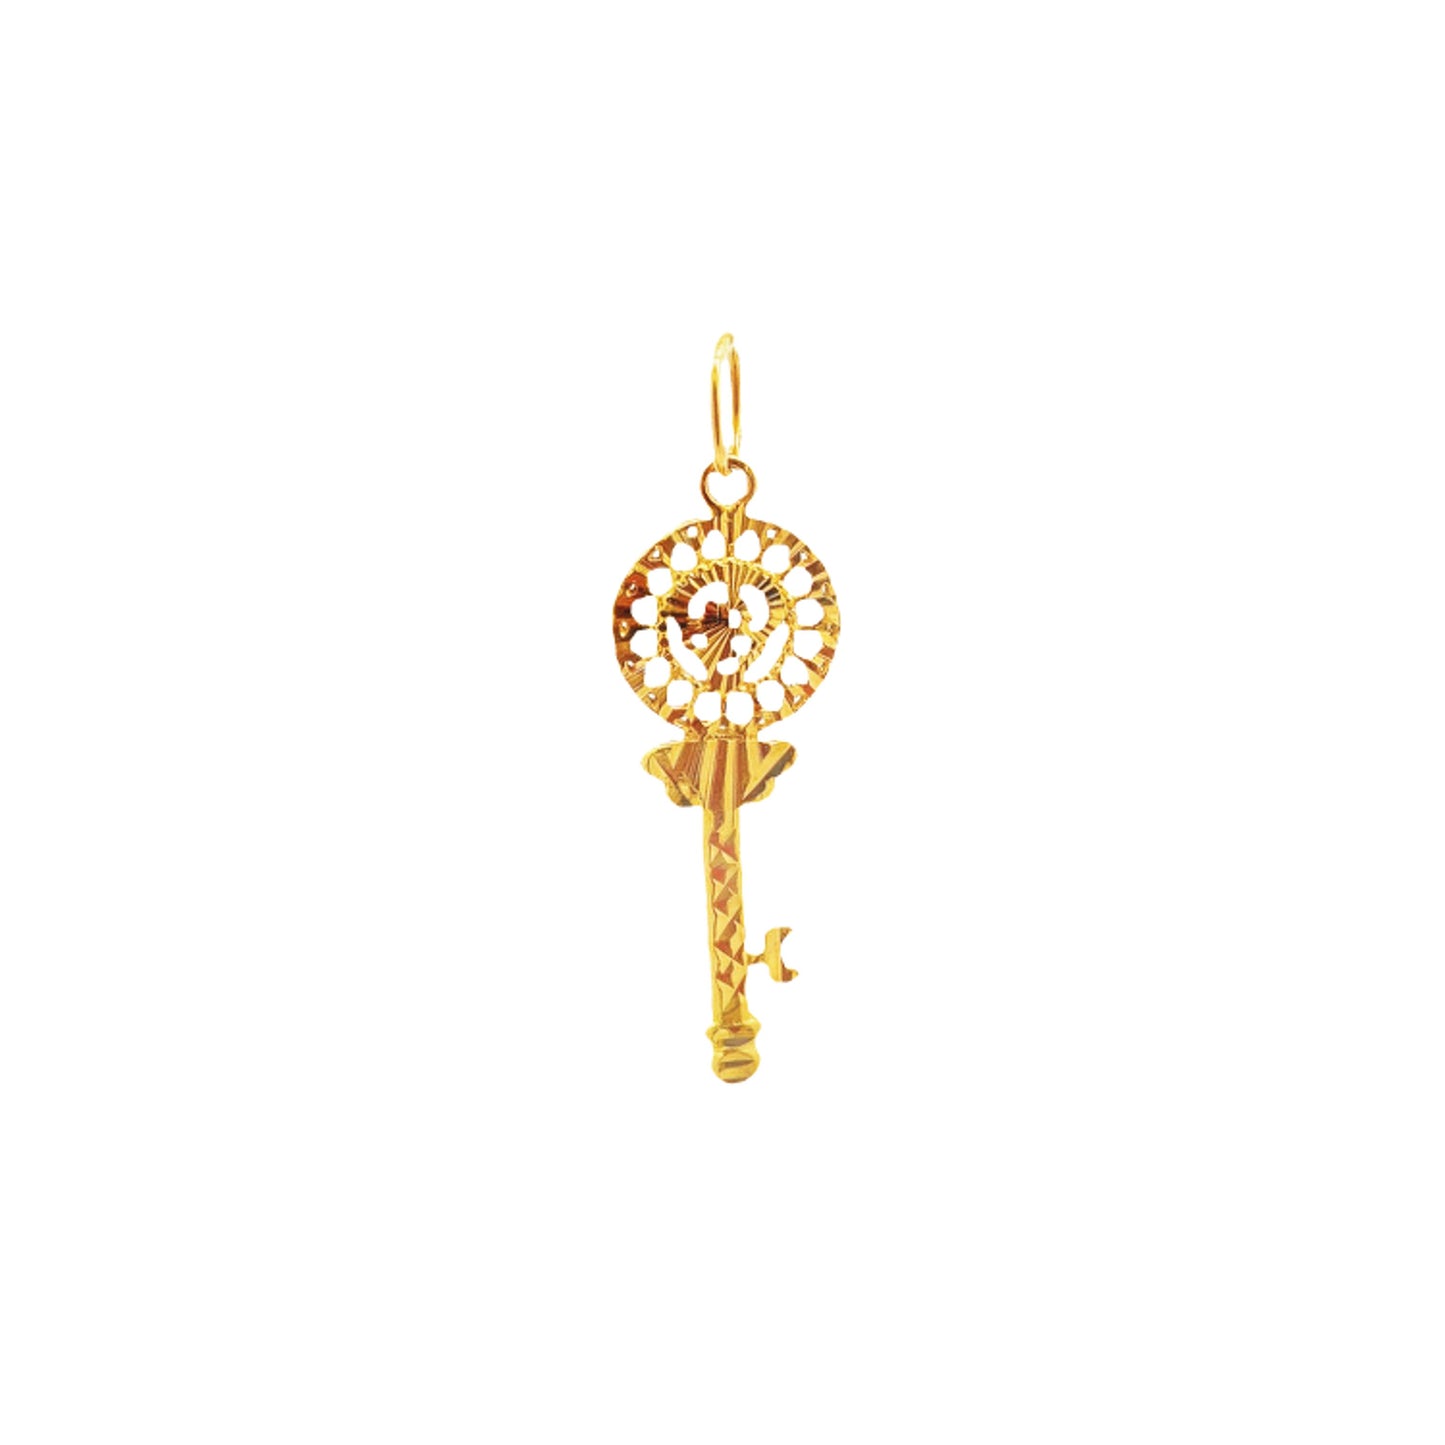 GOLD PENDANT ( 22K ) ( 0.95g ) - 0010369 Chain sold separately